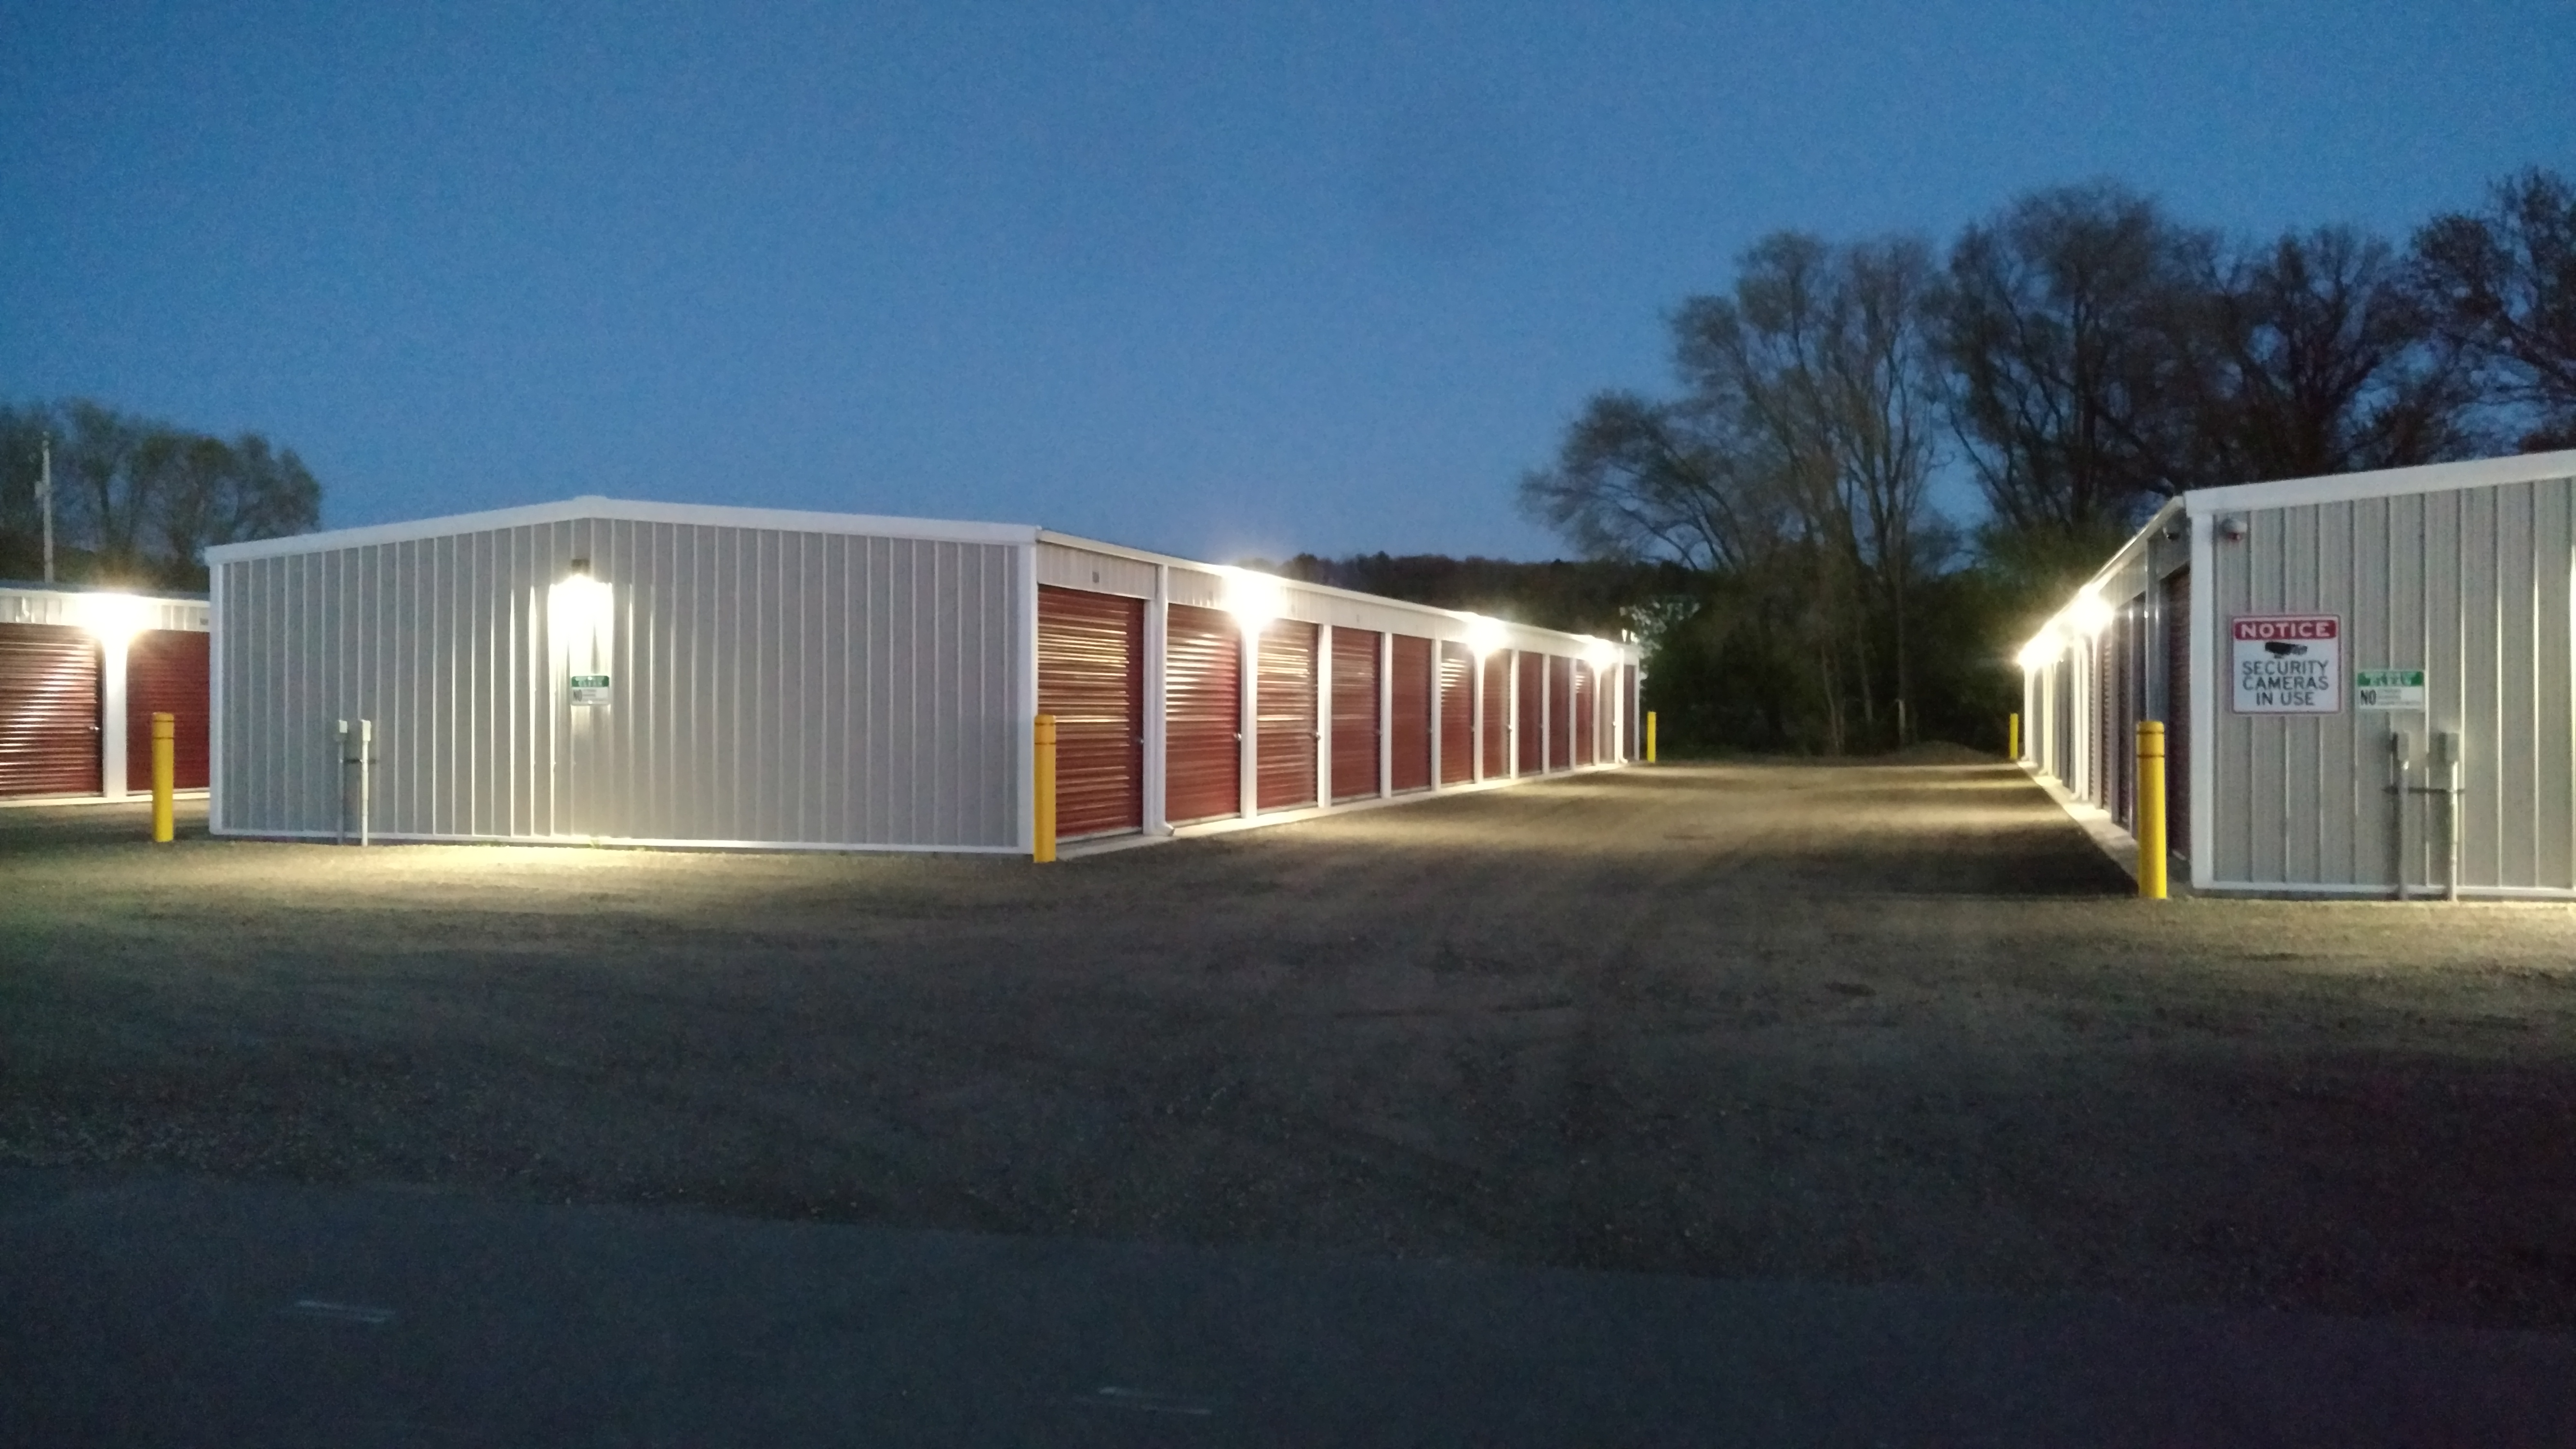 Well lit facility in Tomah, WI